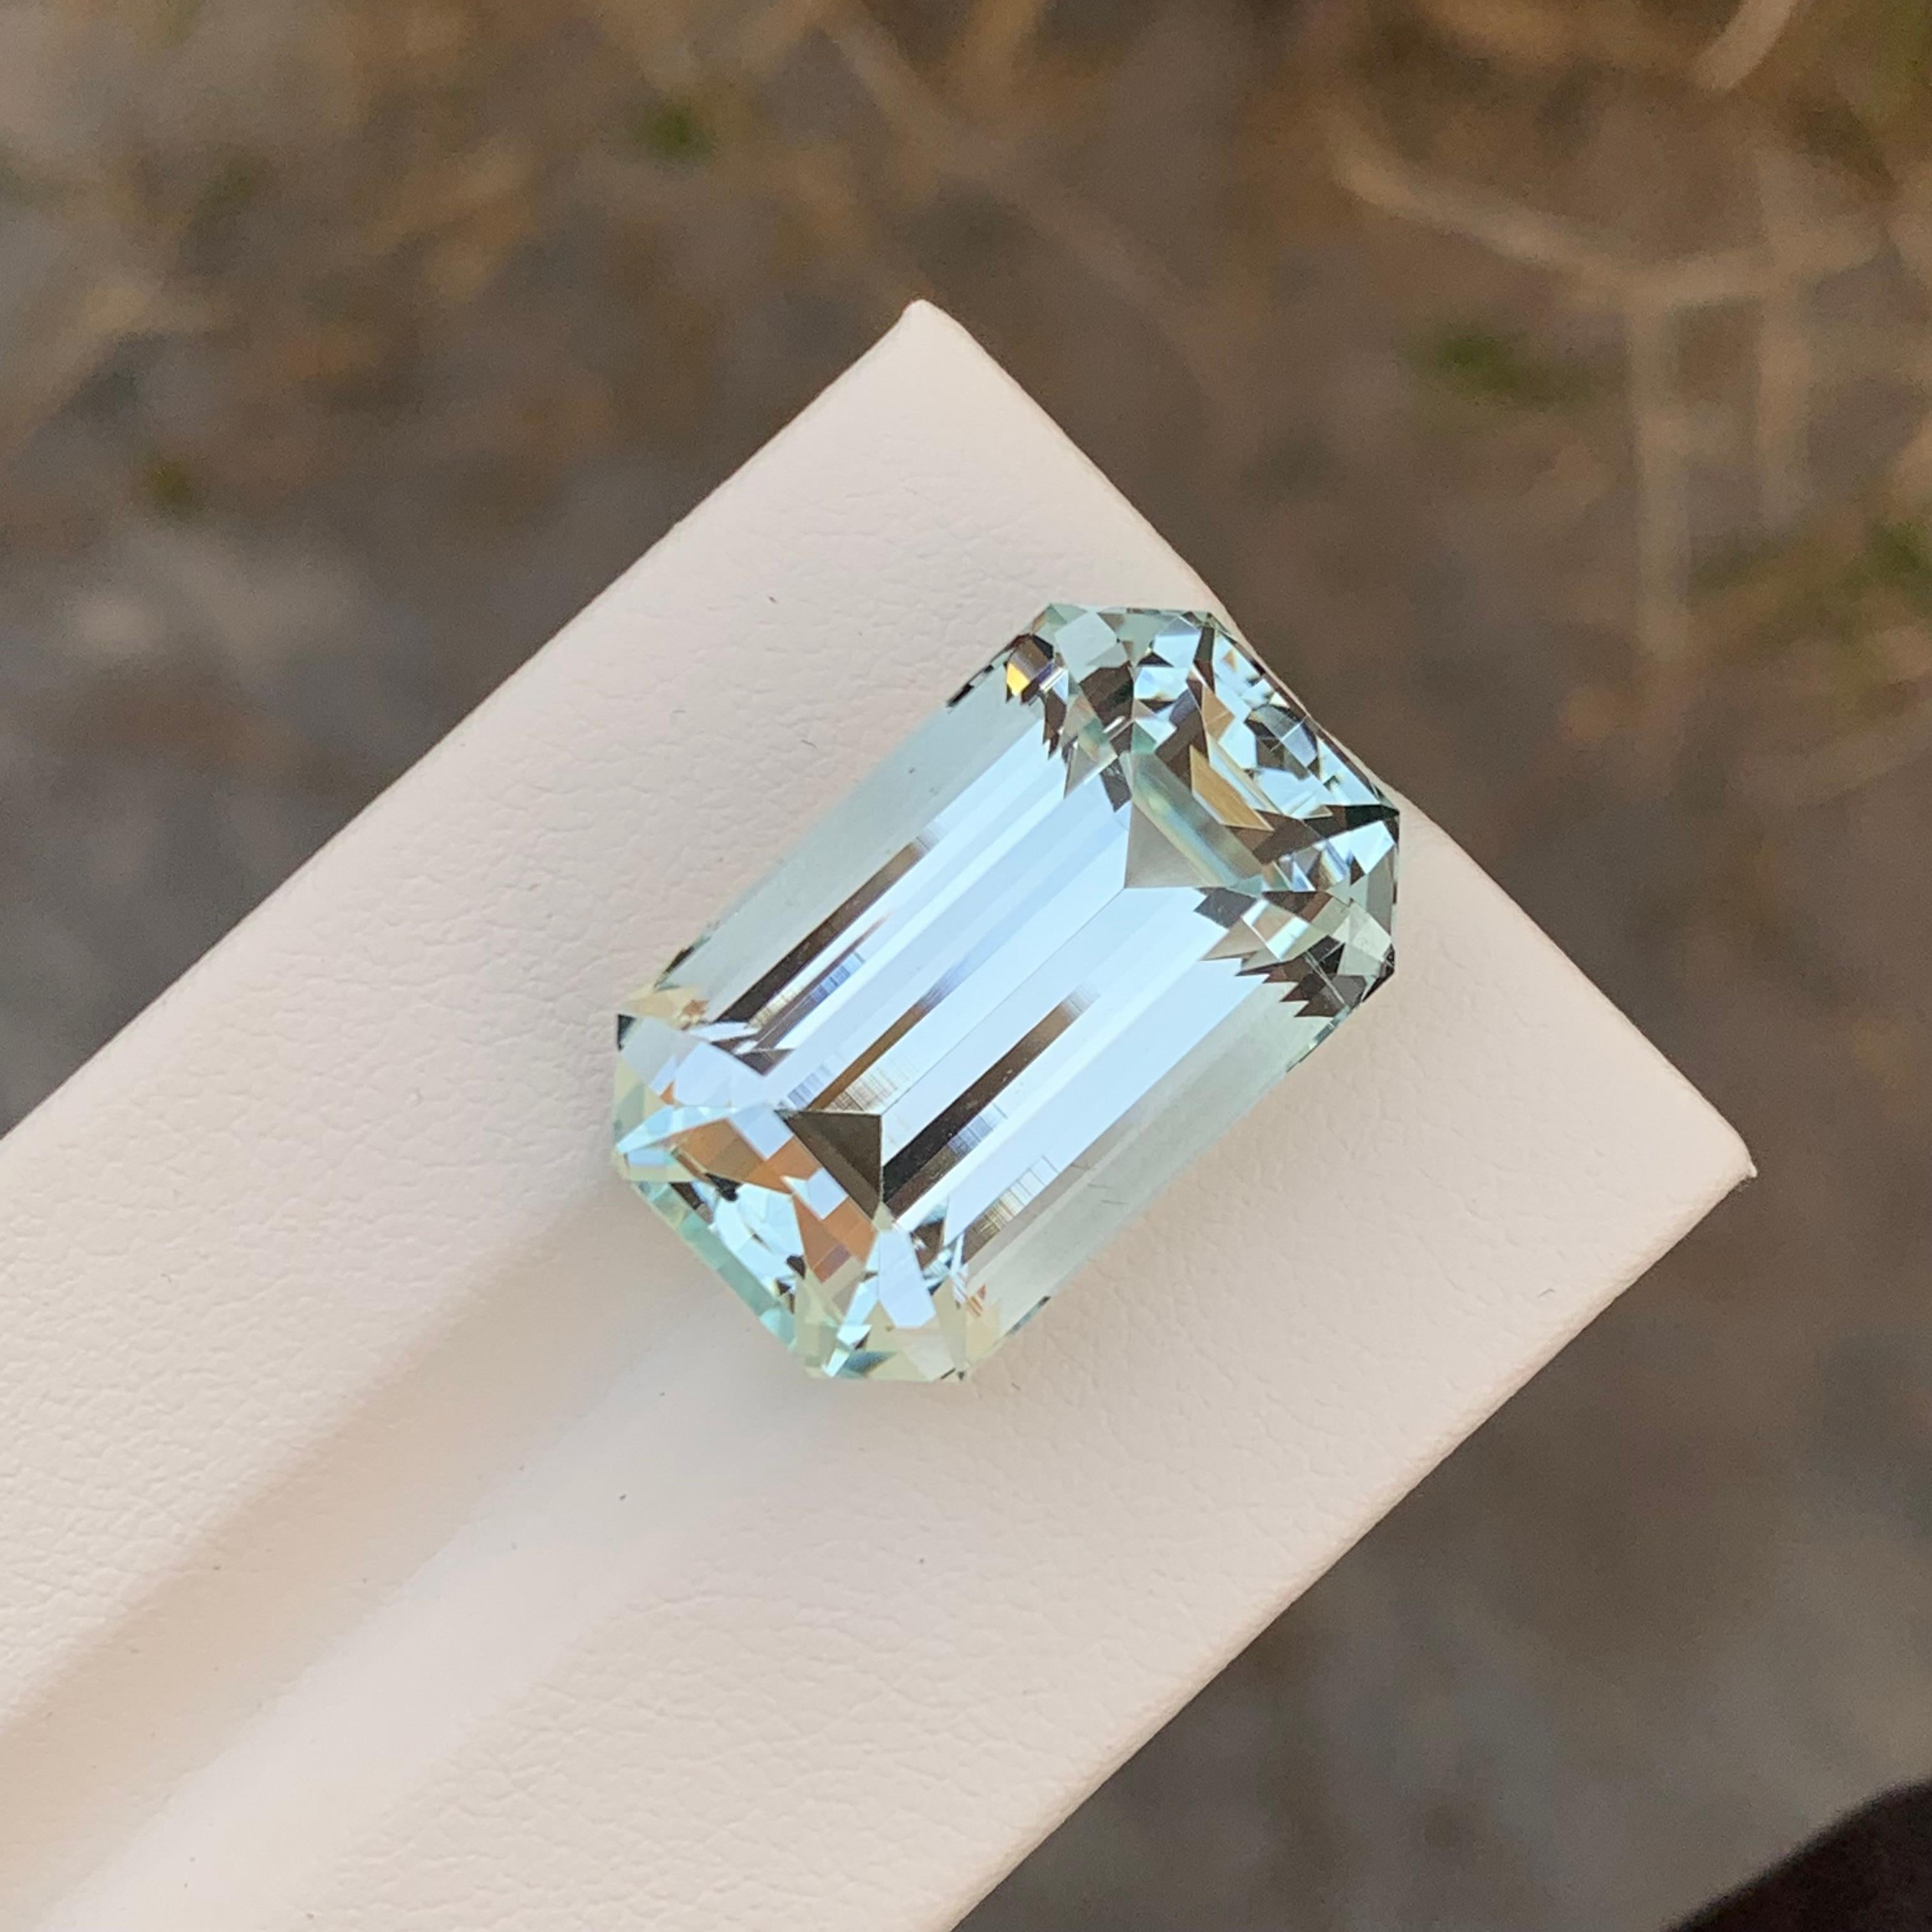 Huge 26.75 Carats Natural Loose Aquamarine Emerald Shape Gem From Shigar Mine In New Condition For Sale In Peshawar, PK